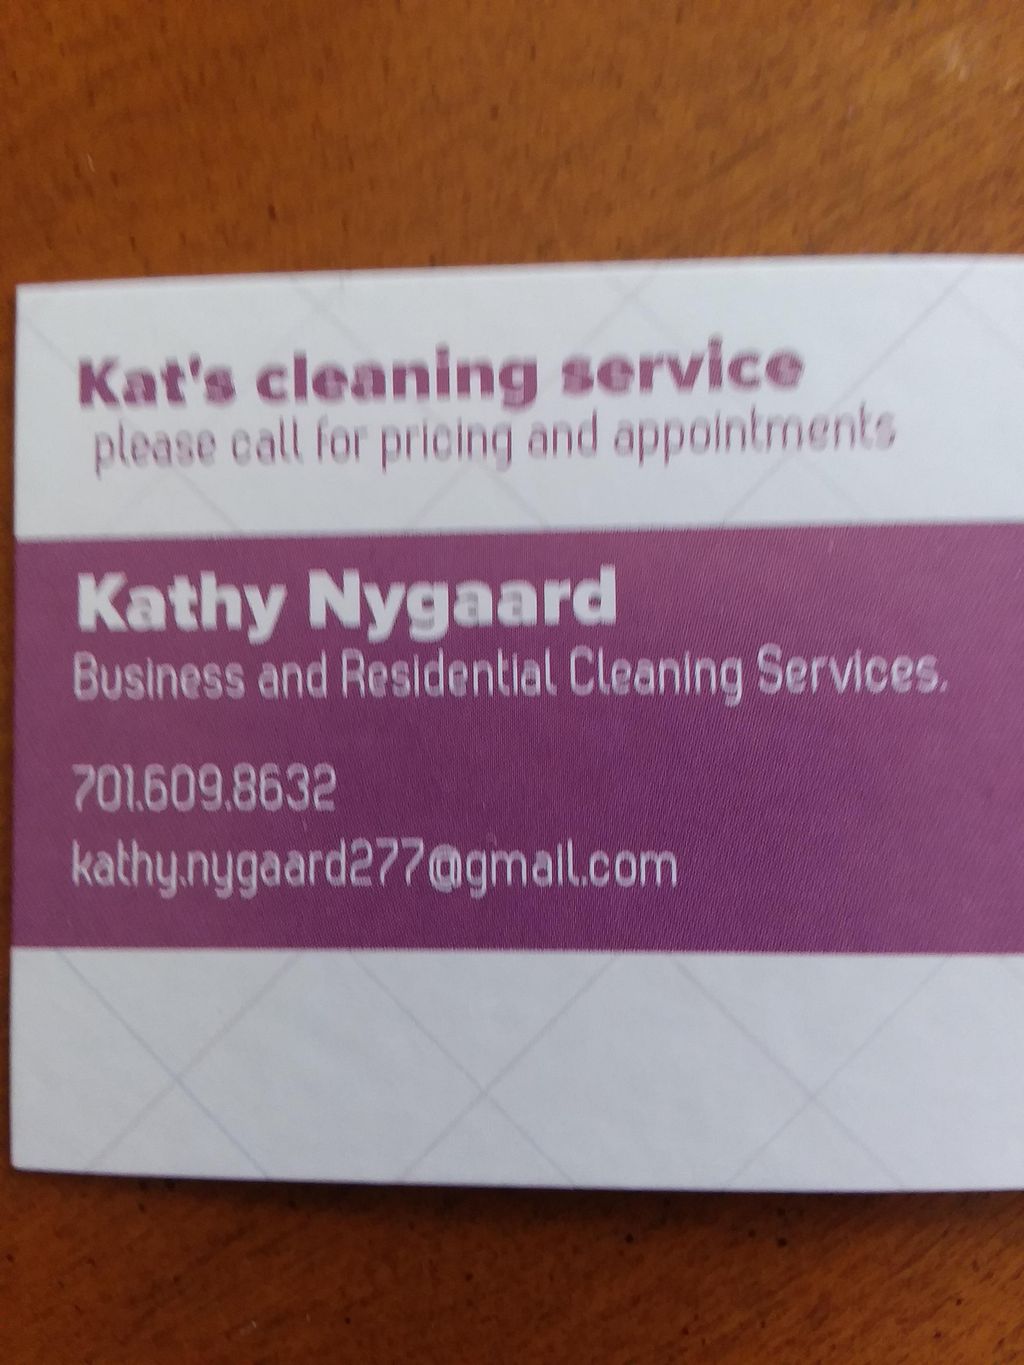 Kat's cleaning